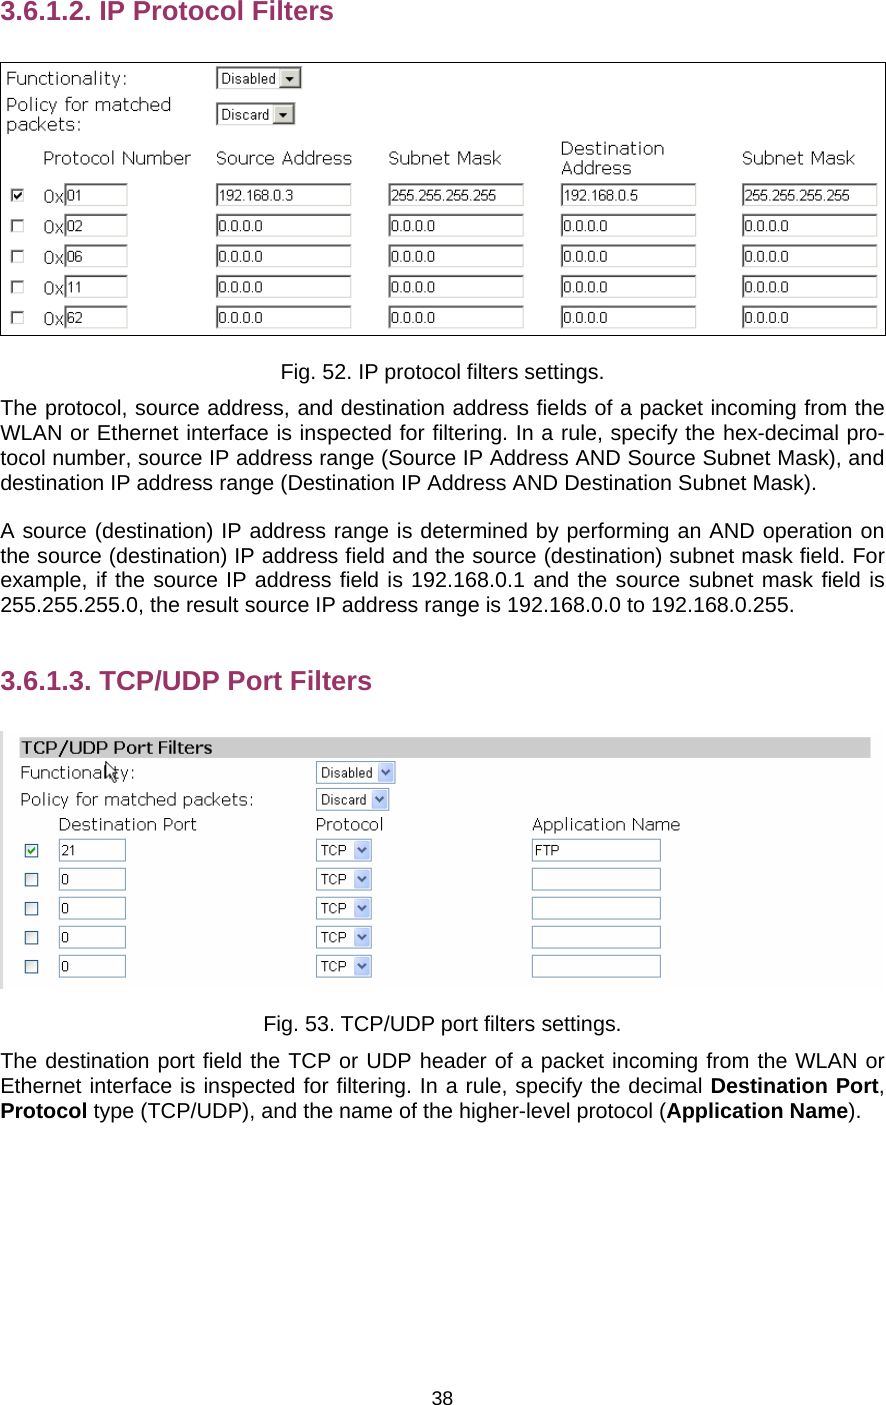   383.6.1.2. IP Protocol Filters  Fig. 52. IP protocol filters settings. The protocol, source address, and destination address fields of a packet incoming from the WLAN or Ethernet interface is inspected for filtering. In a rule, specify the hex-decimal pro-tocol number, source IP address range (Source IP Address AND Source Subnet Mask), and destination IP address range (Destination IP Address AND Destination Subnet Mask). A source (destination) IP address range is determined by performing an AND operation on the source (destination) IP address field and the source (destination) subnet mask field. For example, if the source IP address field is 192.168.0.1 and the source subnet mask field is 255.255.255.0, the result source IP address range is 192.168.0.0 to 192.168.0.255. 3.6.1.3. TCP/UDP Port Filters  Fig. 53. TCP/UDP port filters settings. The destination port field the TCP or UDP header of a packet incoming from the WLAN or Ethernet interface is inspected for filtering. In a rule, specify the decimal Destination Port, Protocol type (TCP/UDP), and the name of the higher-level protocol (Application Name). 